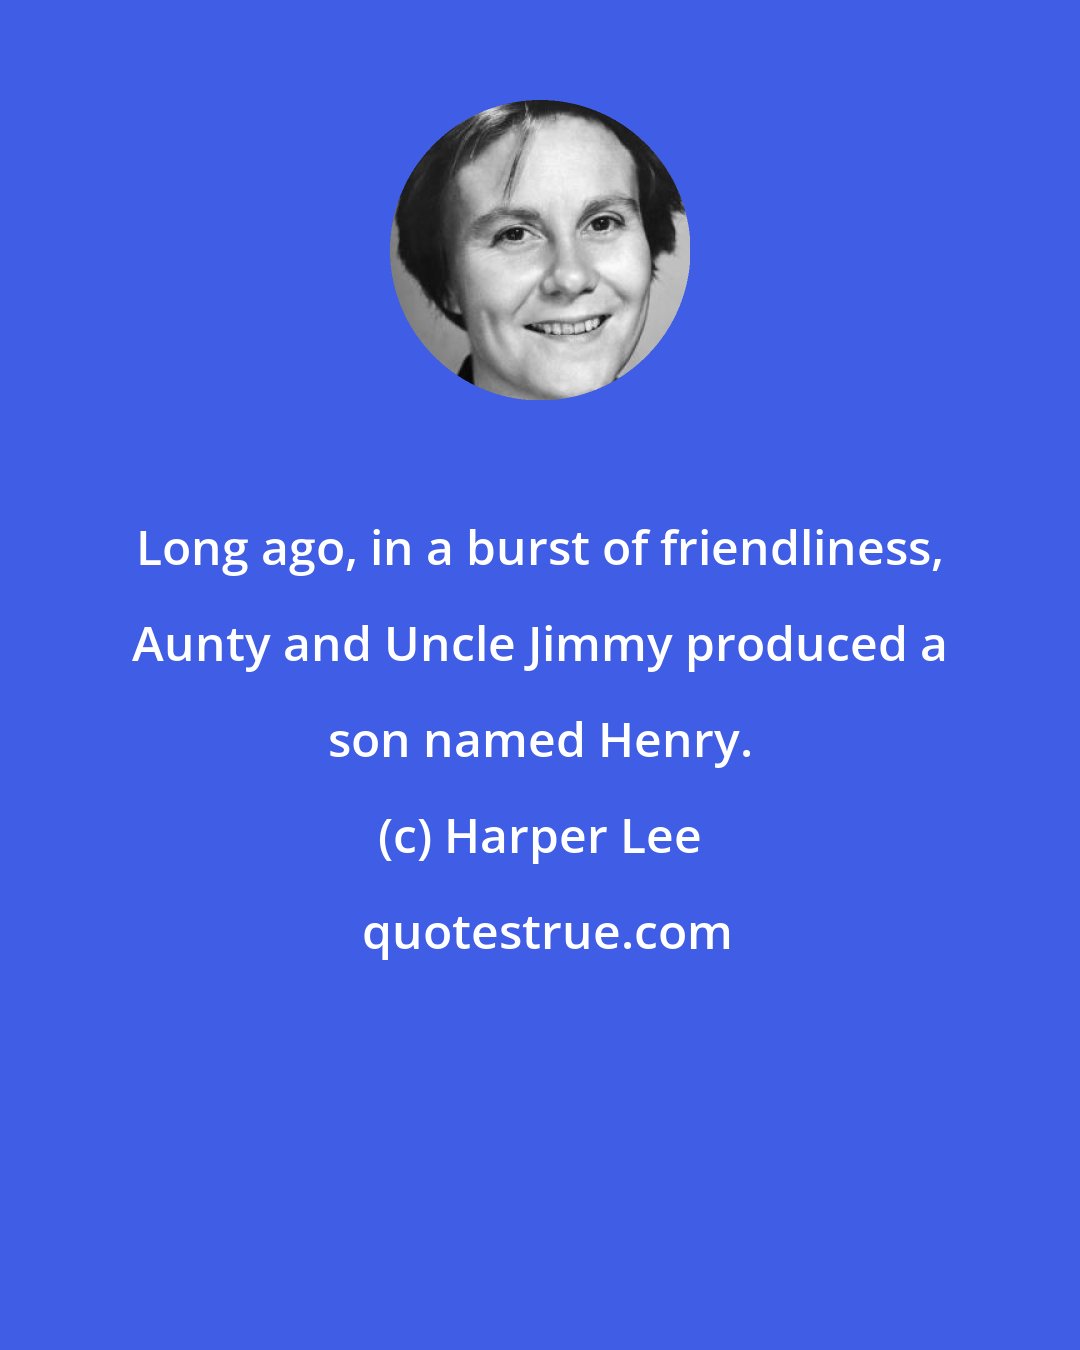 Harper Lee: Long ago, in a burst of friendliness, Aunty and Uncle Jimmy produced a son named Henry.